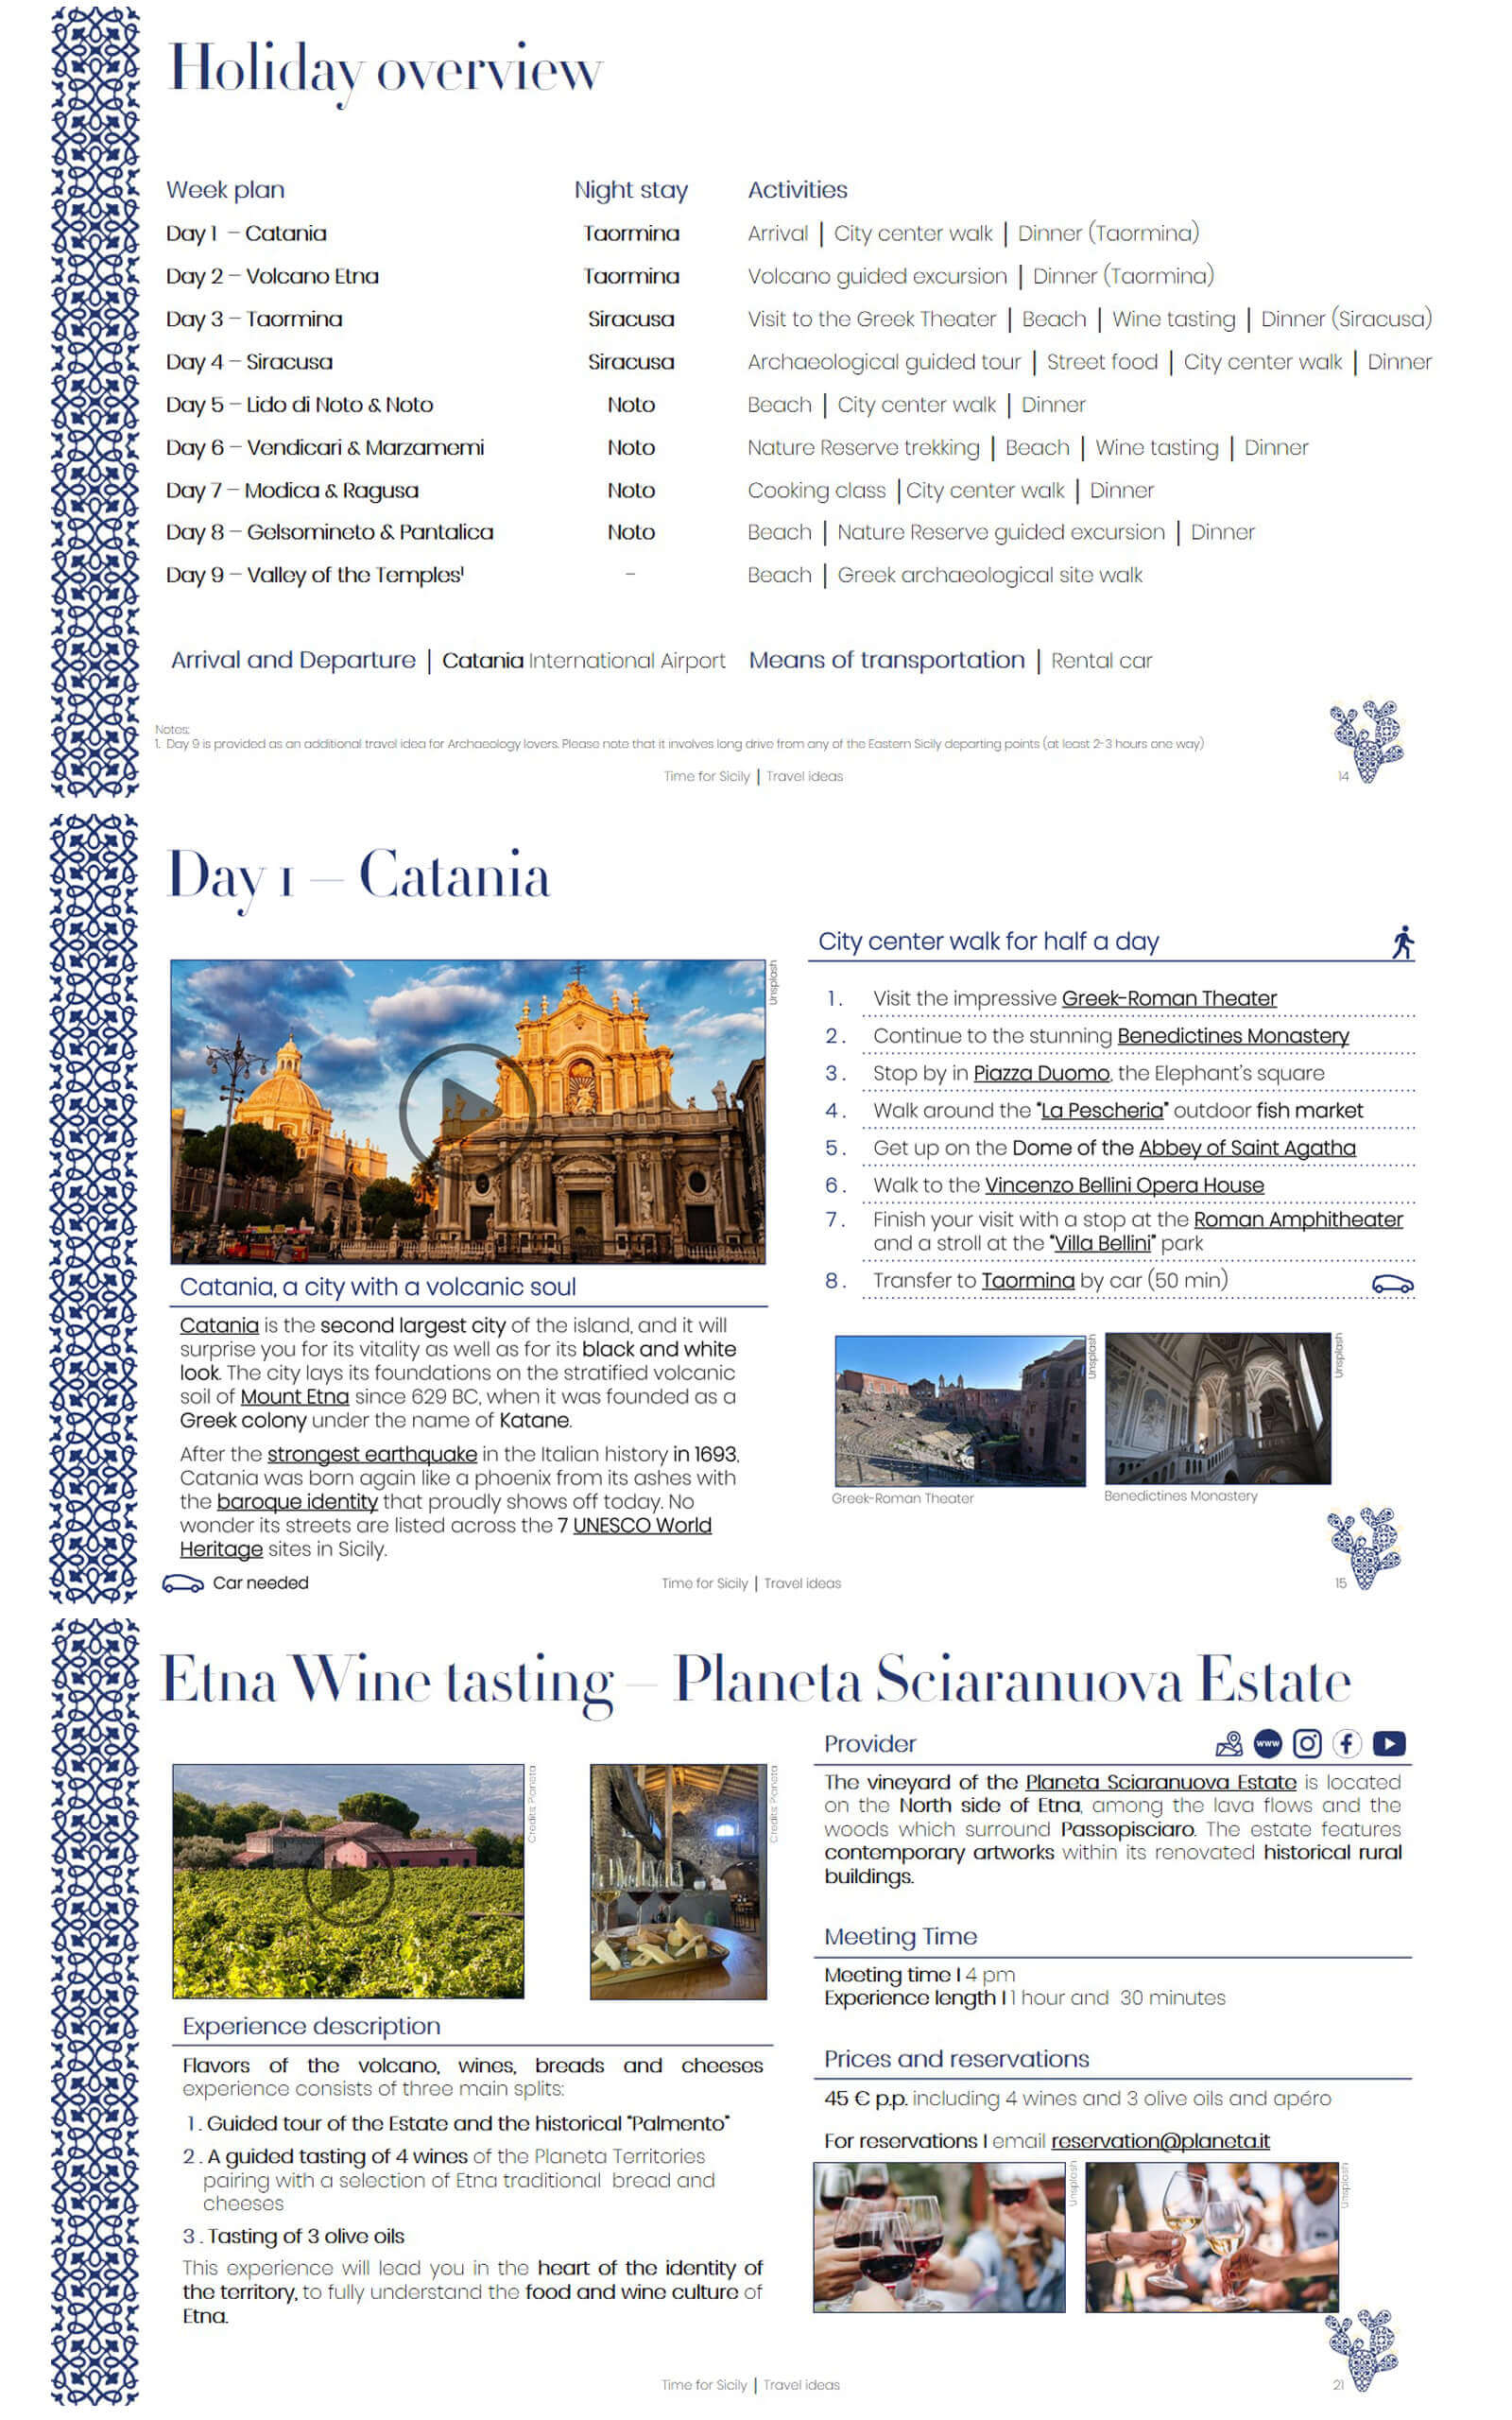 Holiday Overview - Sicily ebook guide